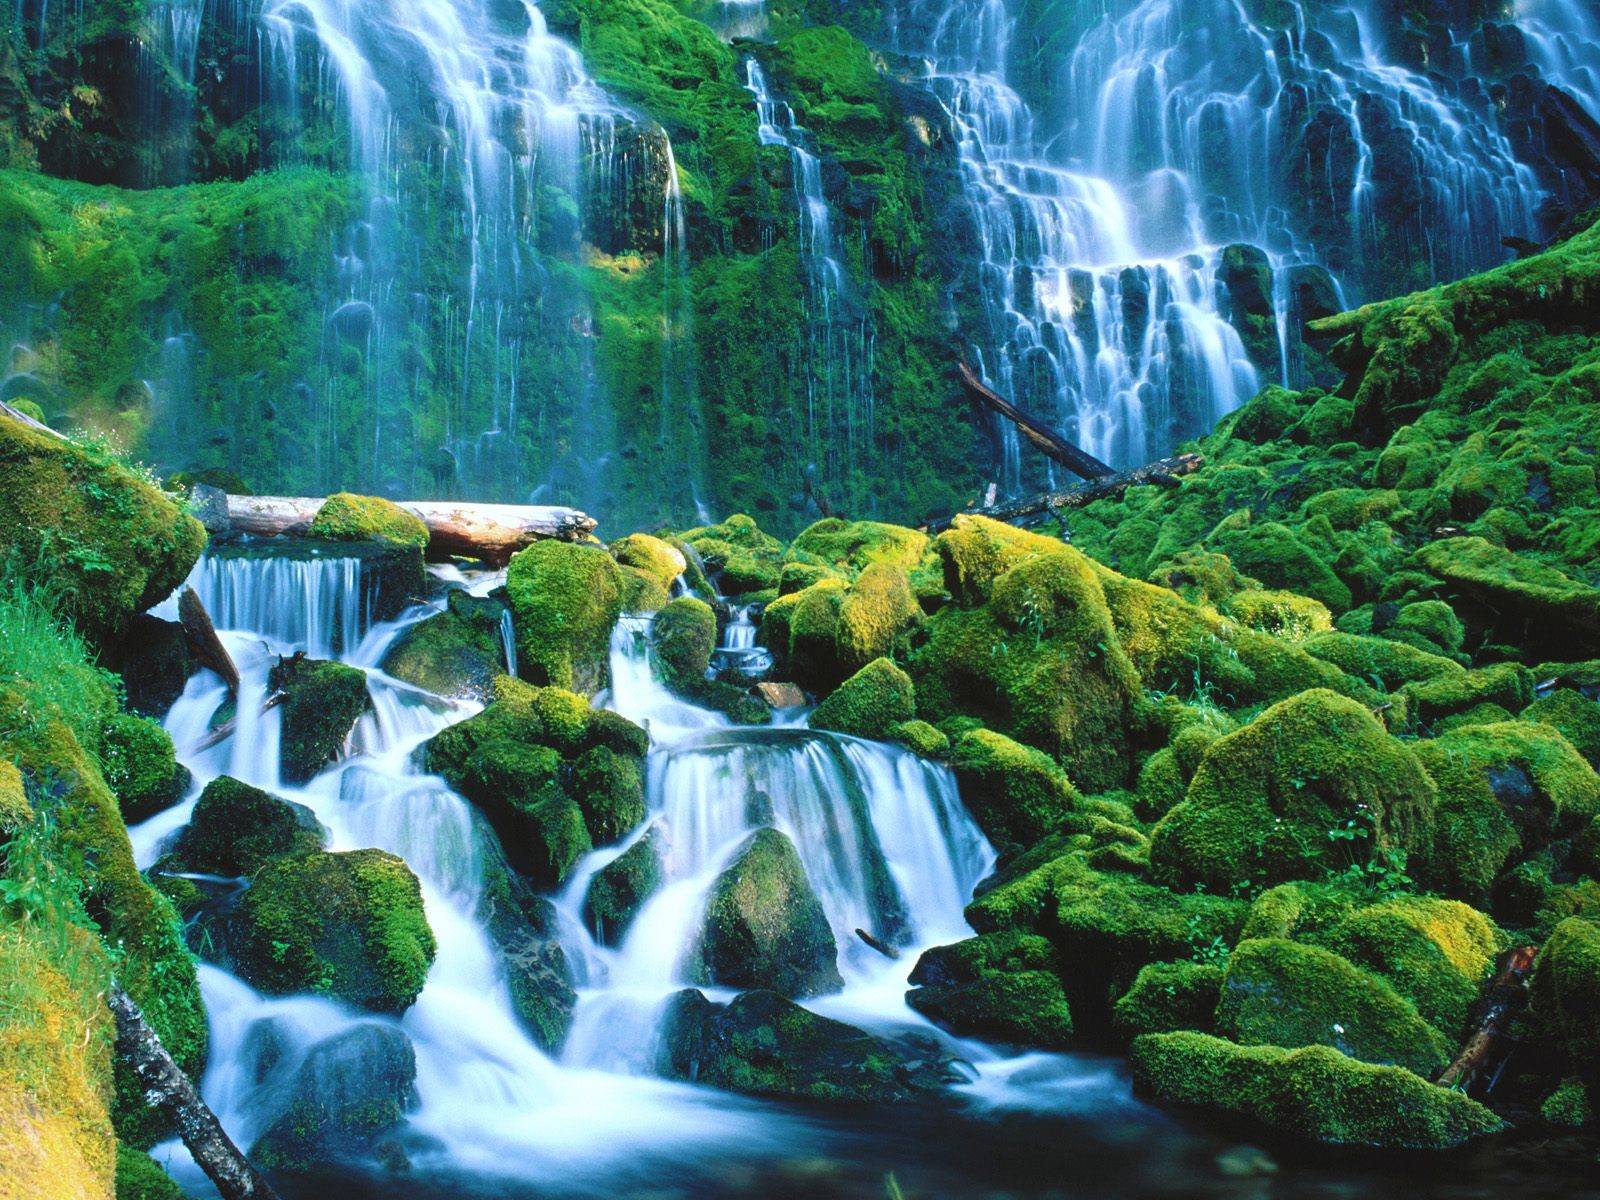 Background Images Of Waterfalls